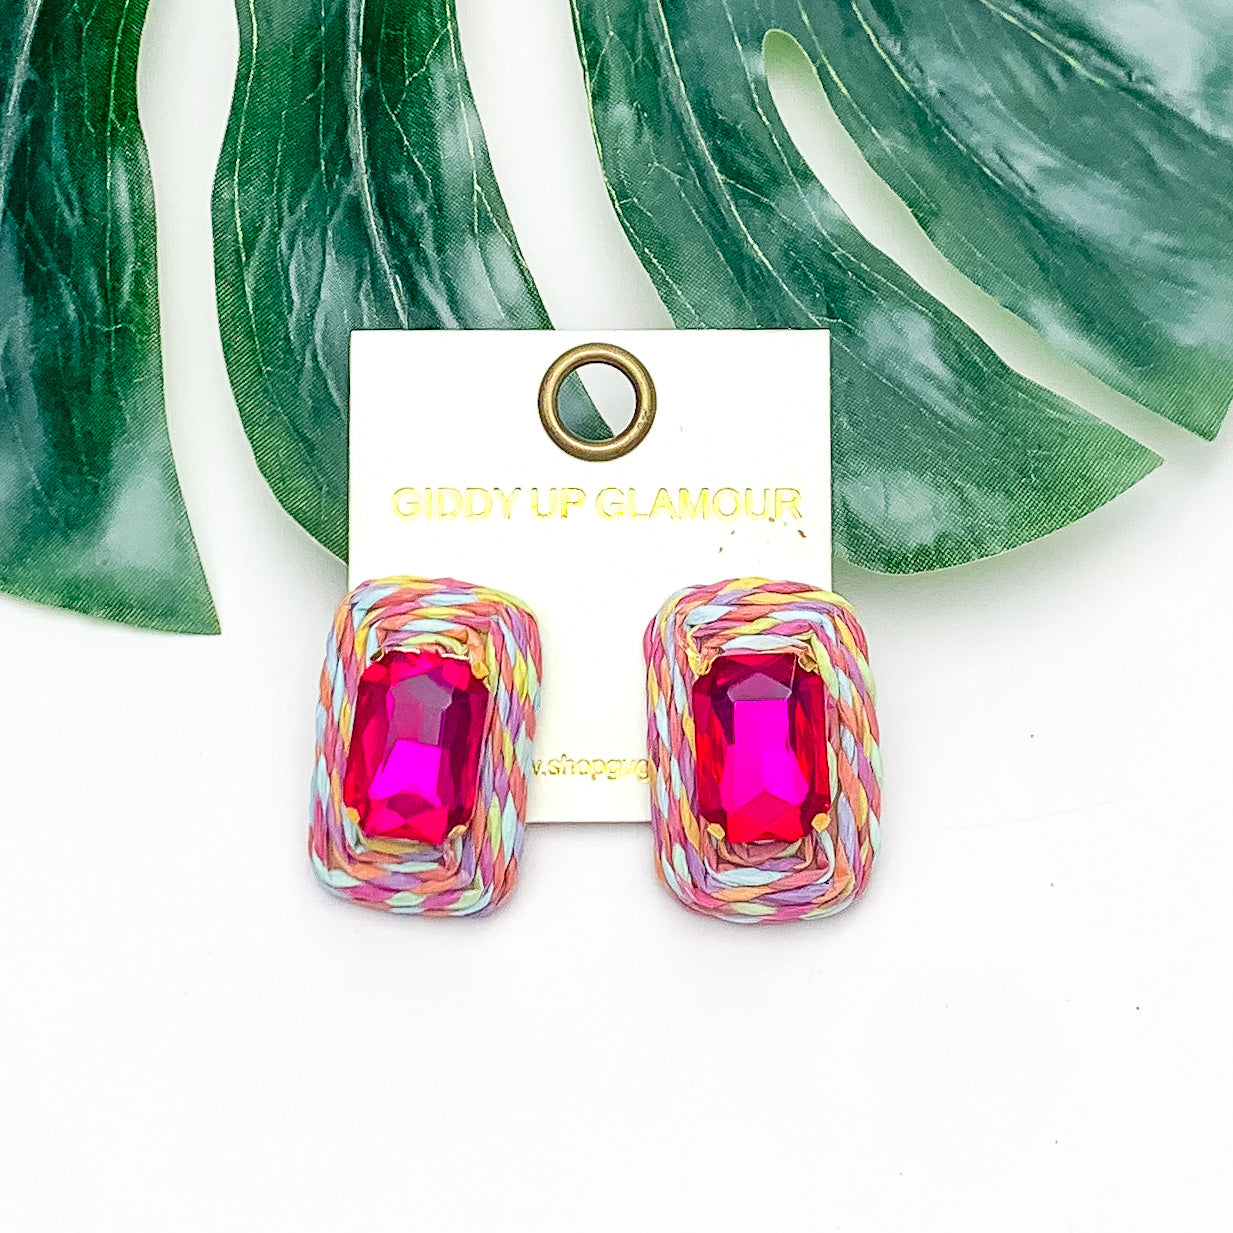 Truly Tropical Raffia Rectangle Earrings in Multicolor With Fuchsia Stone. Pictured on a white background with the earrings laying on a large leaf.